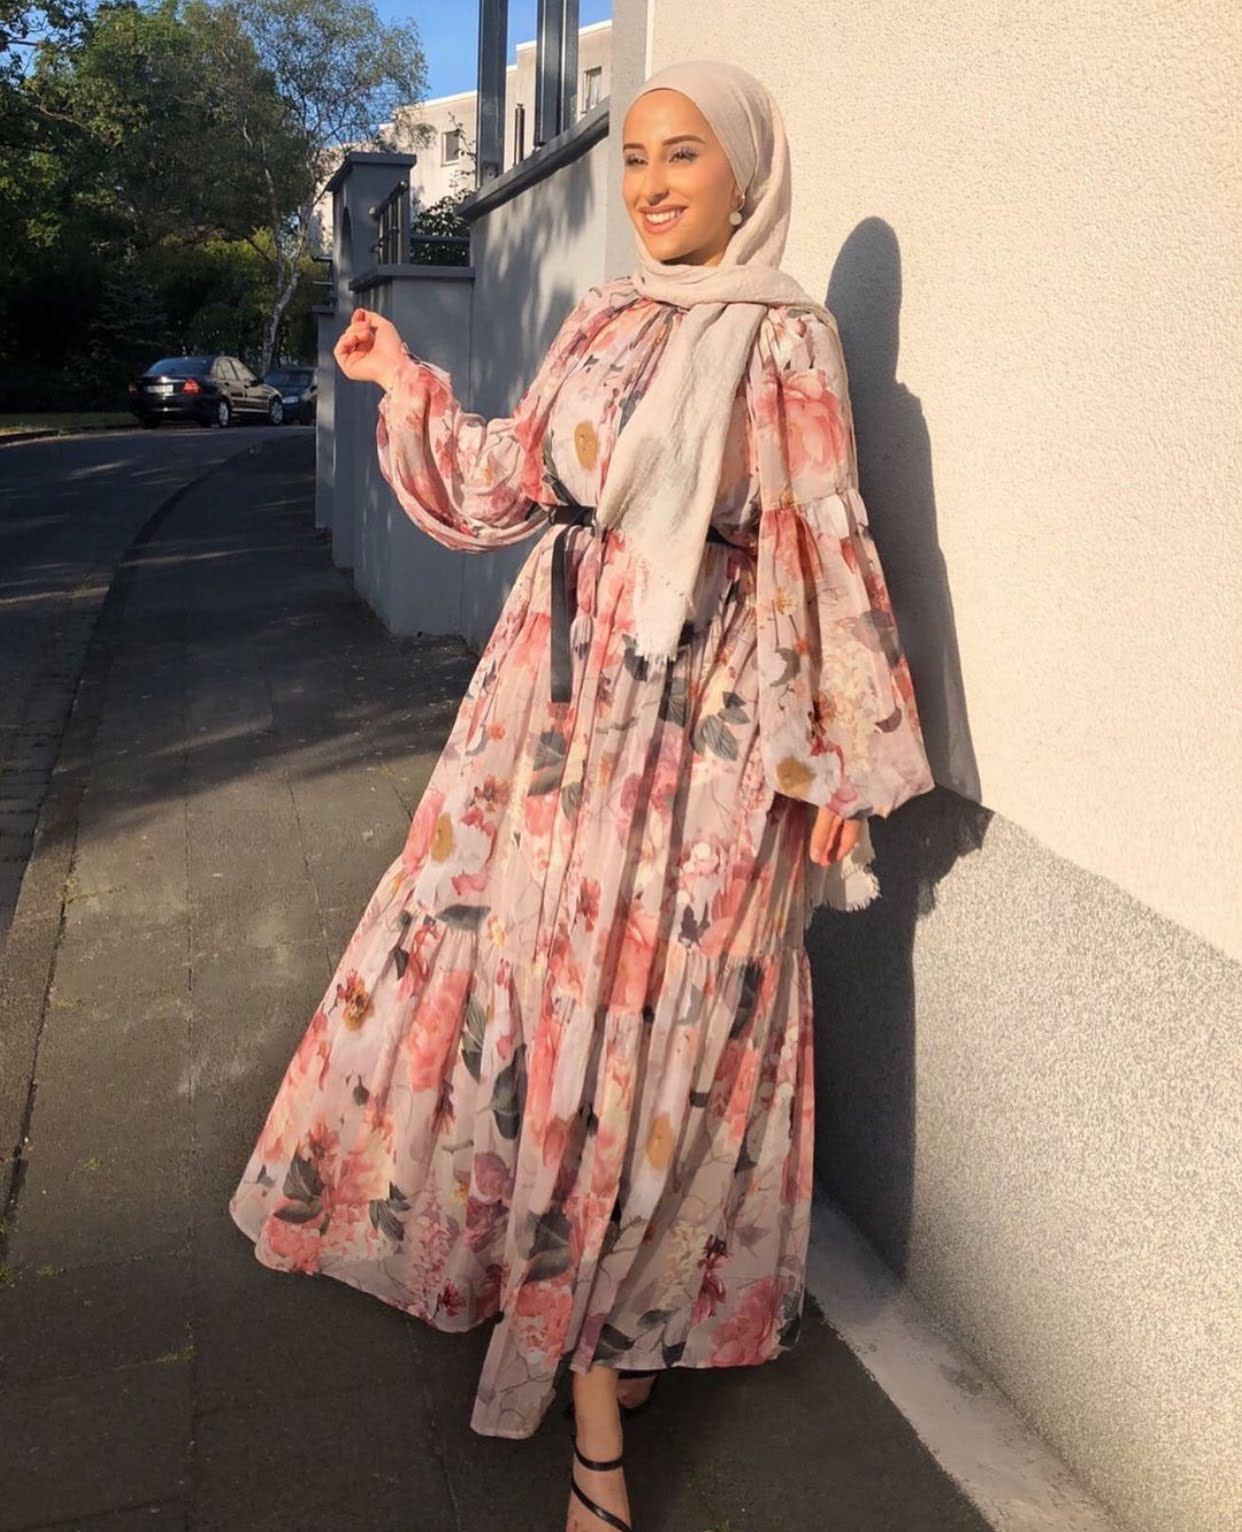 Hijab Fashion Dresses For Summer That You Will Love - Hijab Fashion Dresses For Summer That You Will Love -   16 style Hijab robe ideas